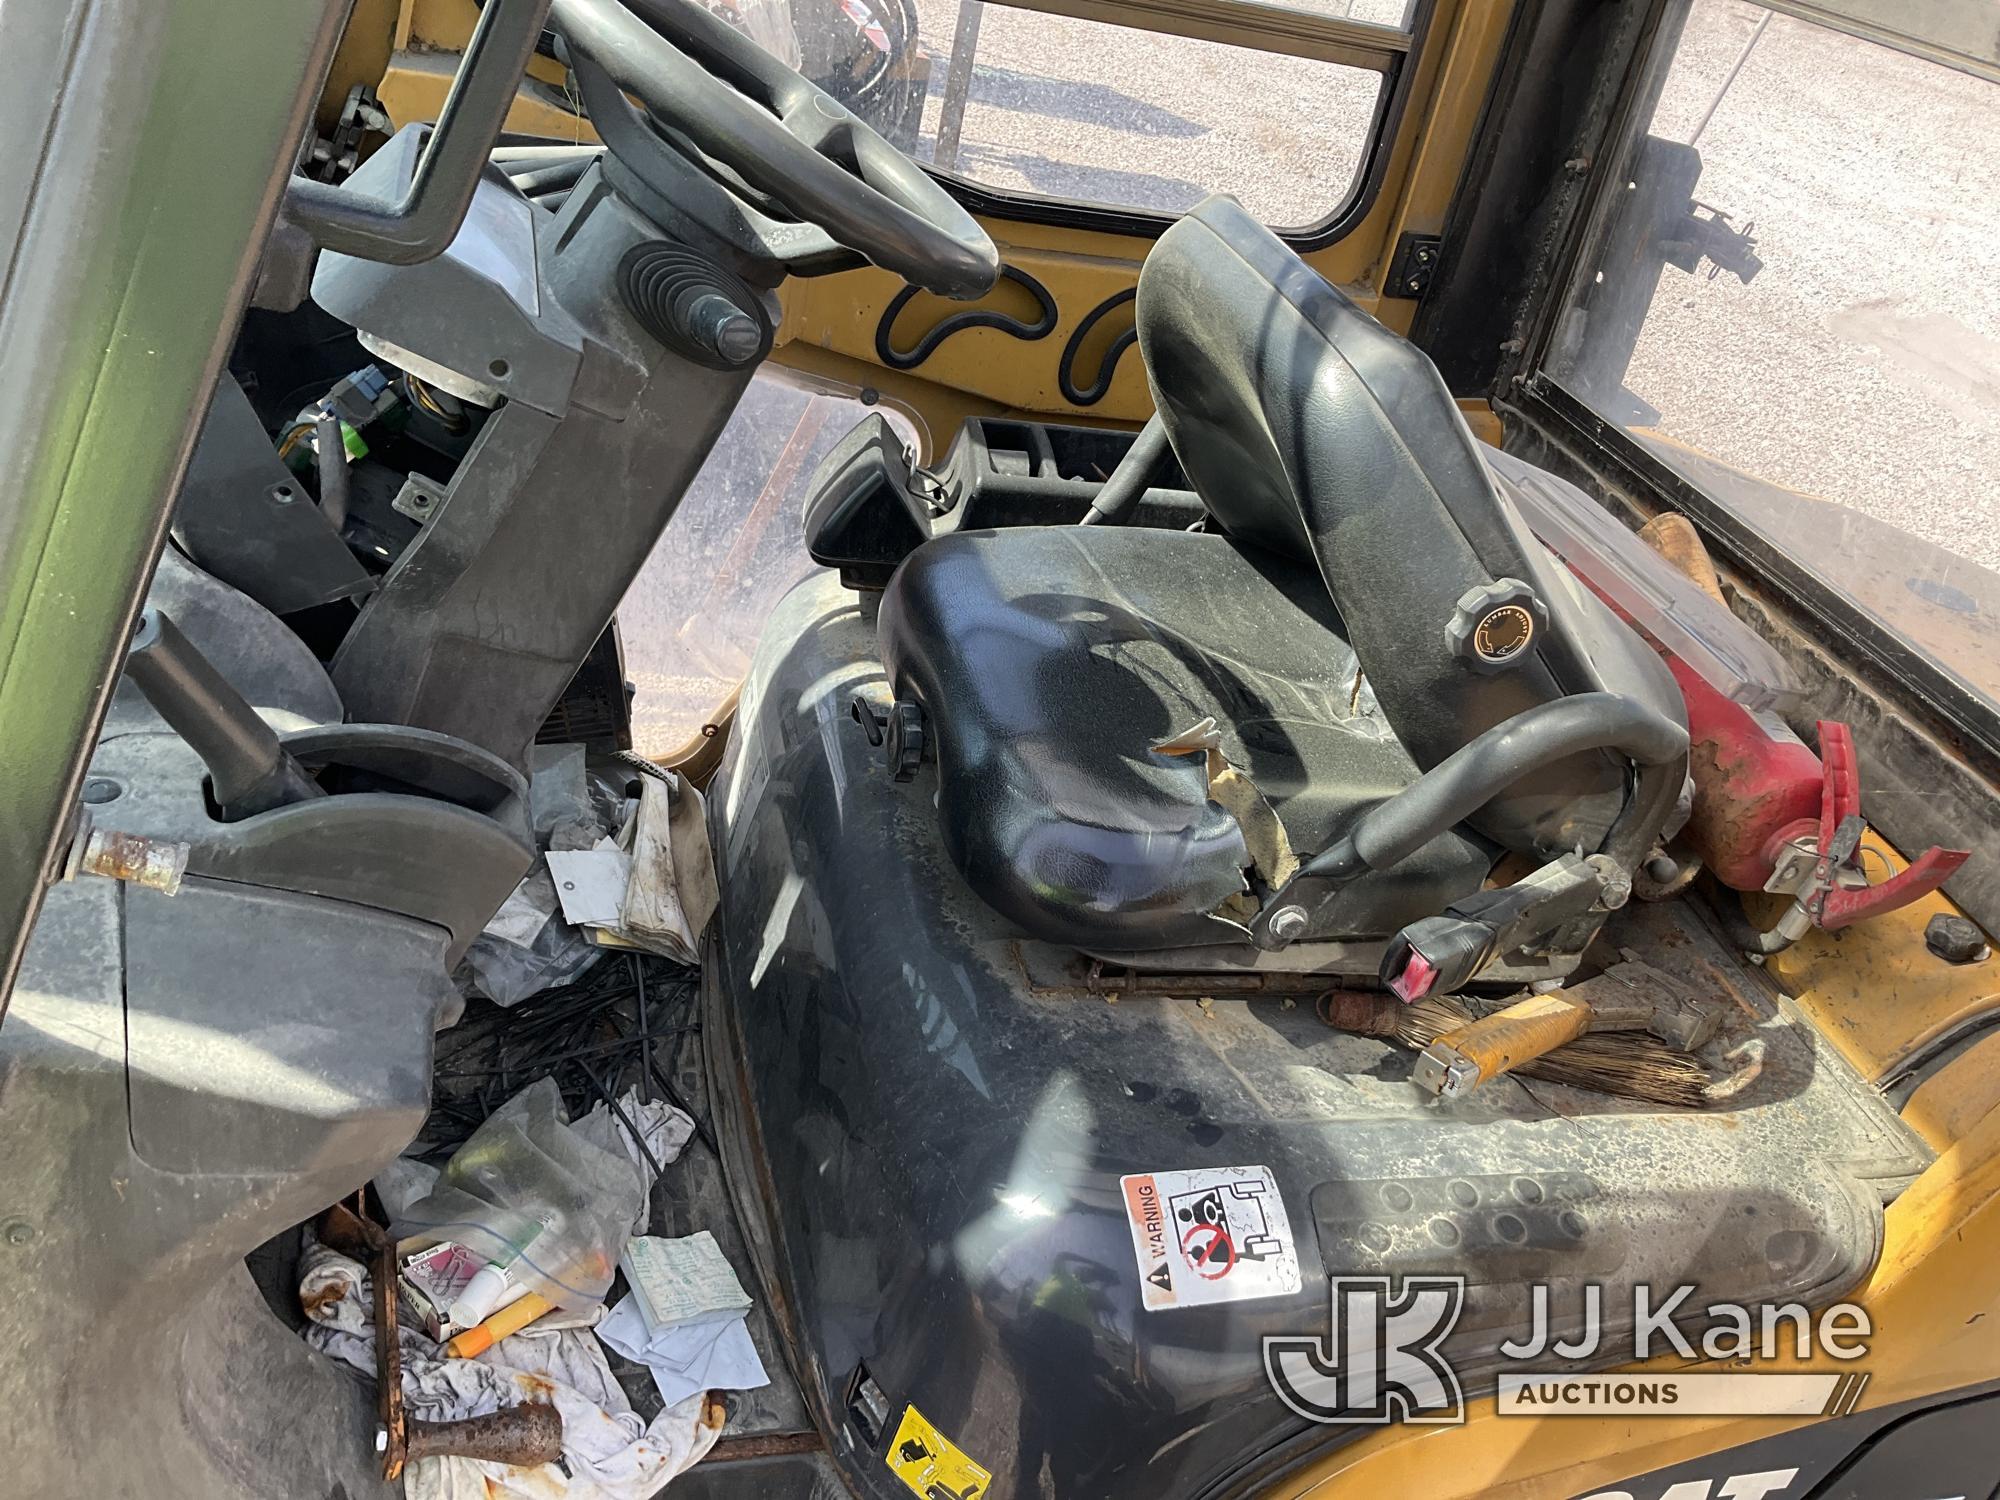 (Verona, KY) 2009 Caterpillar P6000D Rubber Tired Forklift Not Running, Condition Unknown, Steering